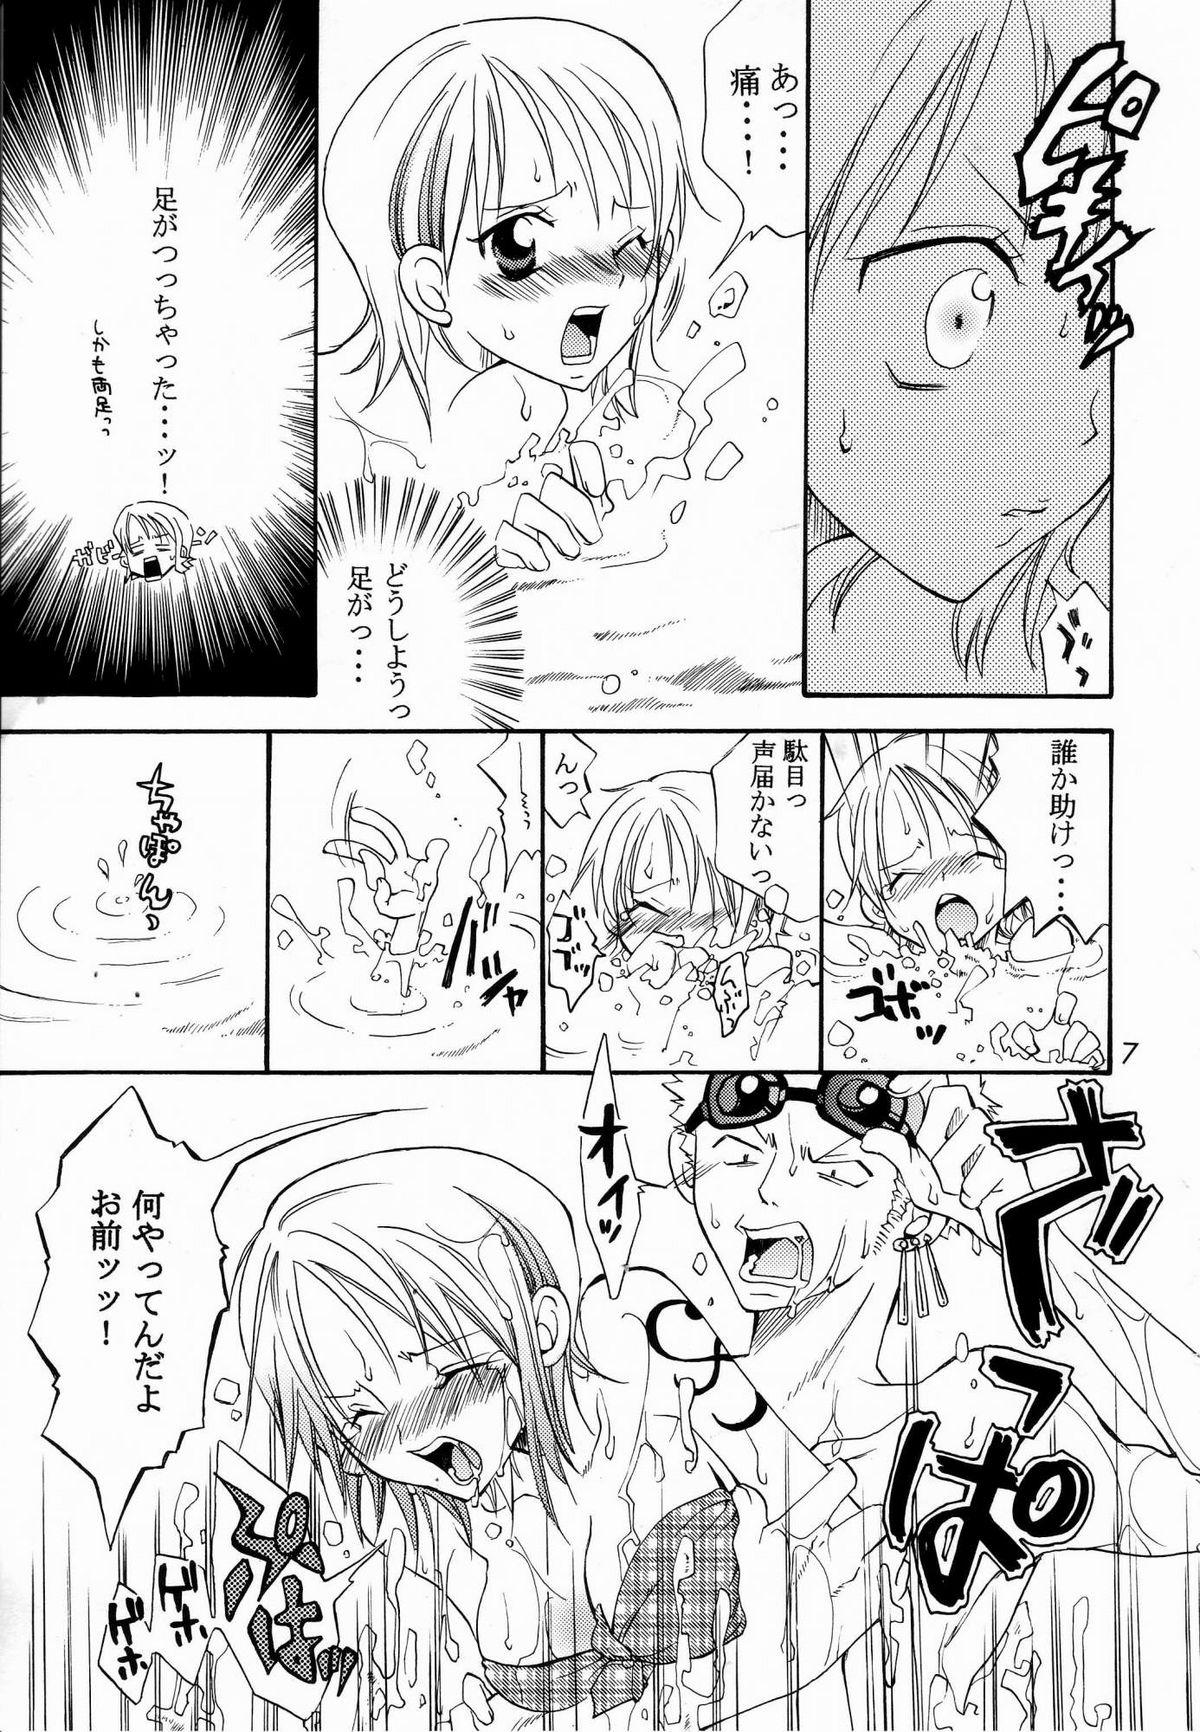 Moms Shiawase Punch! 5 - One piece Grandmother - Page 6